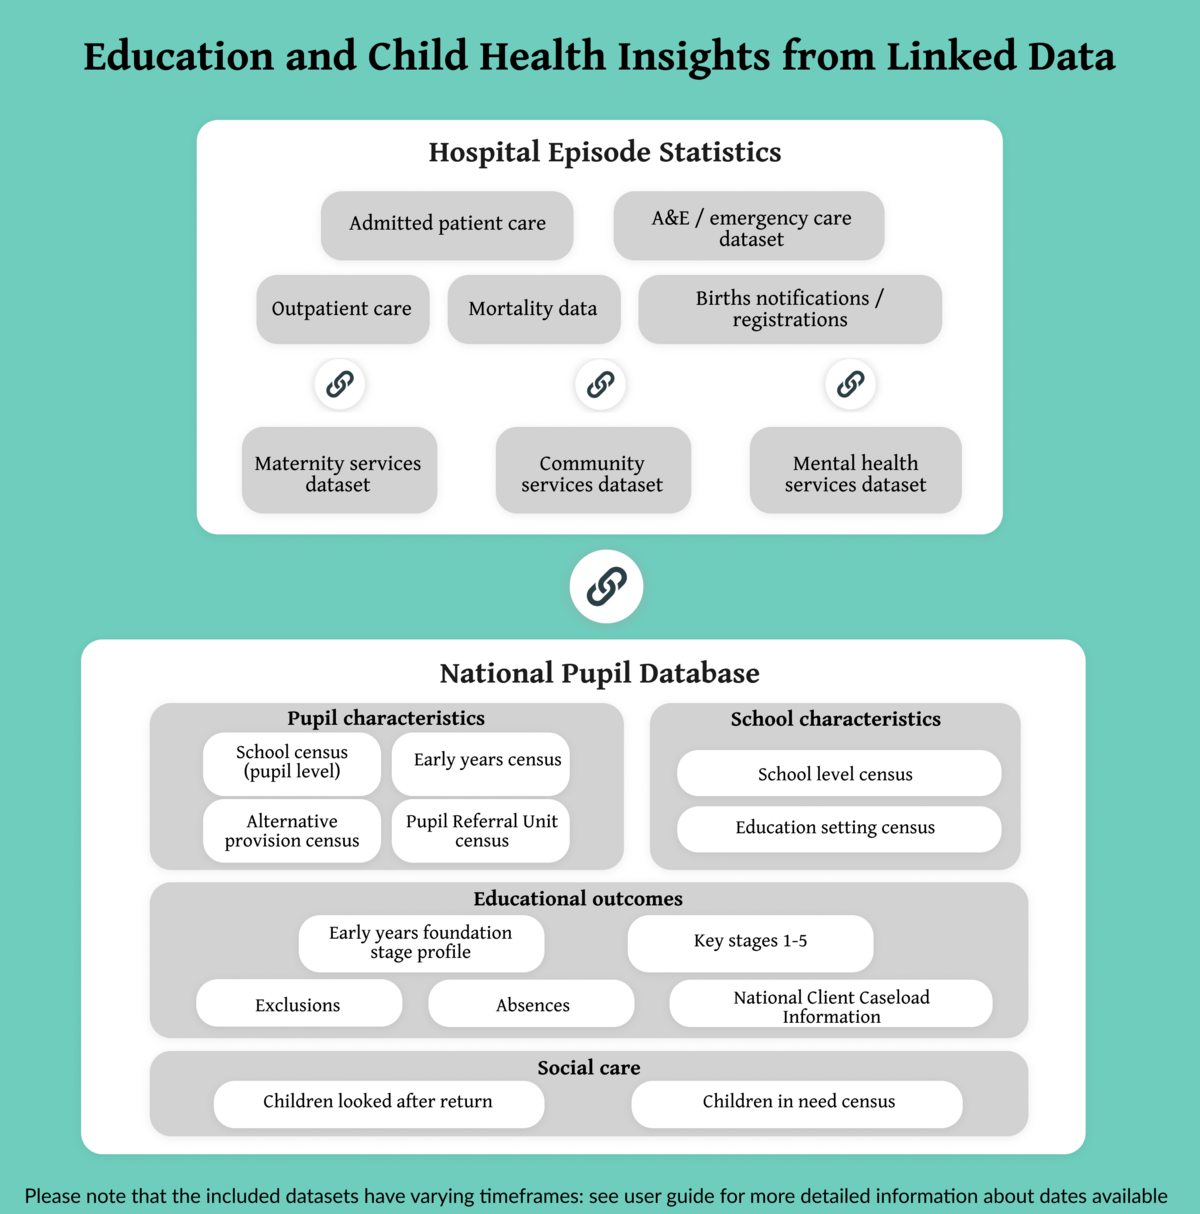 Education and Child Health Insights from Linked Data - England